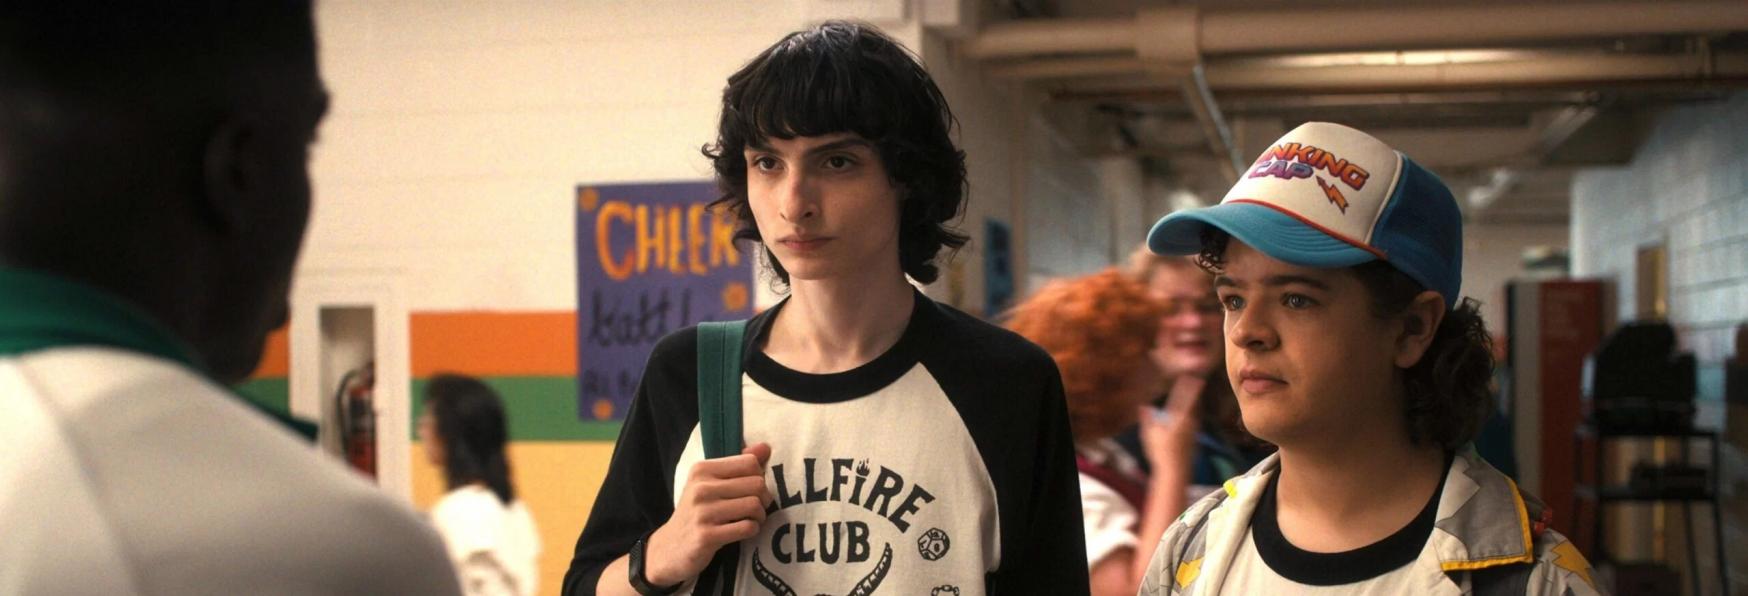 Stranger Things 5: Finn Wolfhard reveals the Potential Release Window of the Season